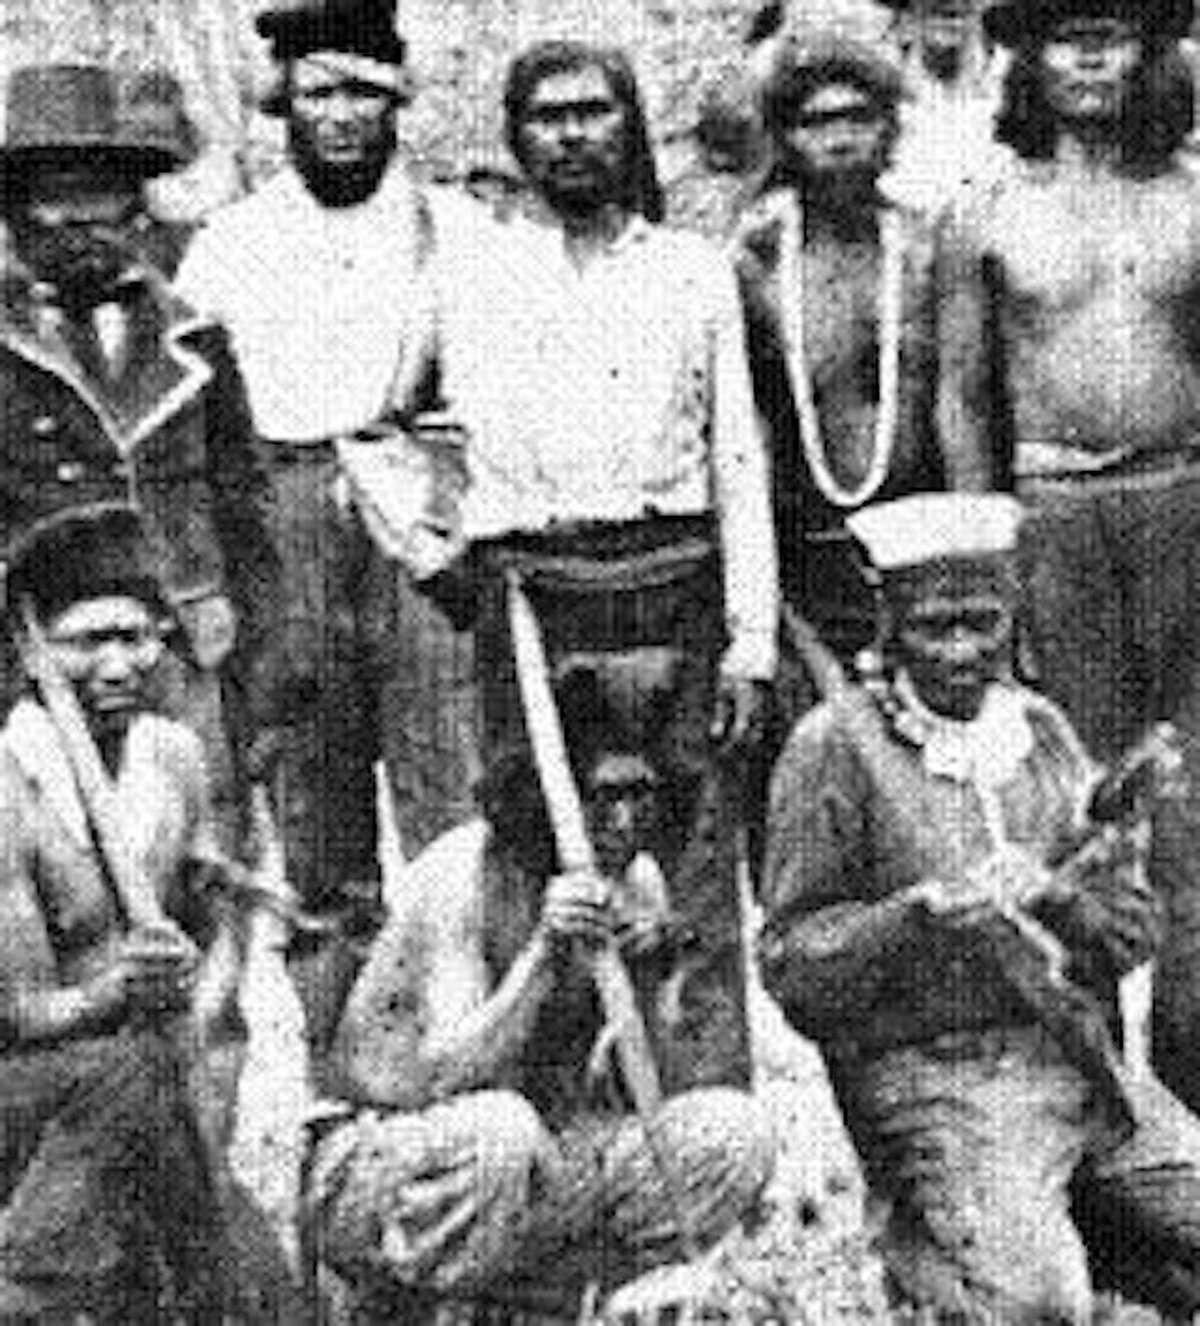 Yuki men at the Nome Cult Farm, a forced labor camp in Mendocino County, Calif., circa 1858. Historian Benjamin Madley says Nome Cult Farm essentially was an ethnic gulag for captured Native Americans of the Eel River watershed. Eventually the camp became part of the Round Valley Reservation.